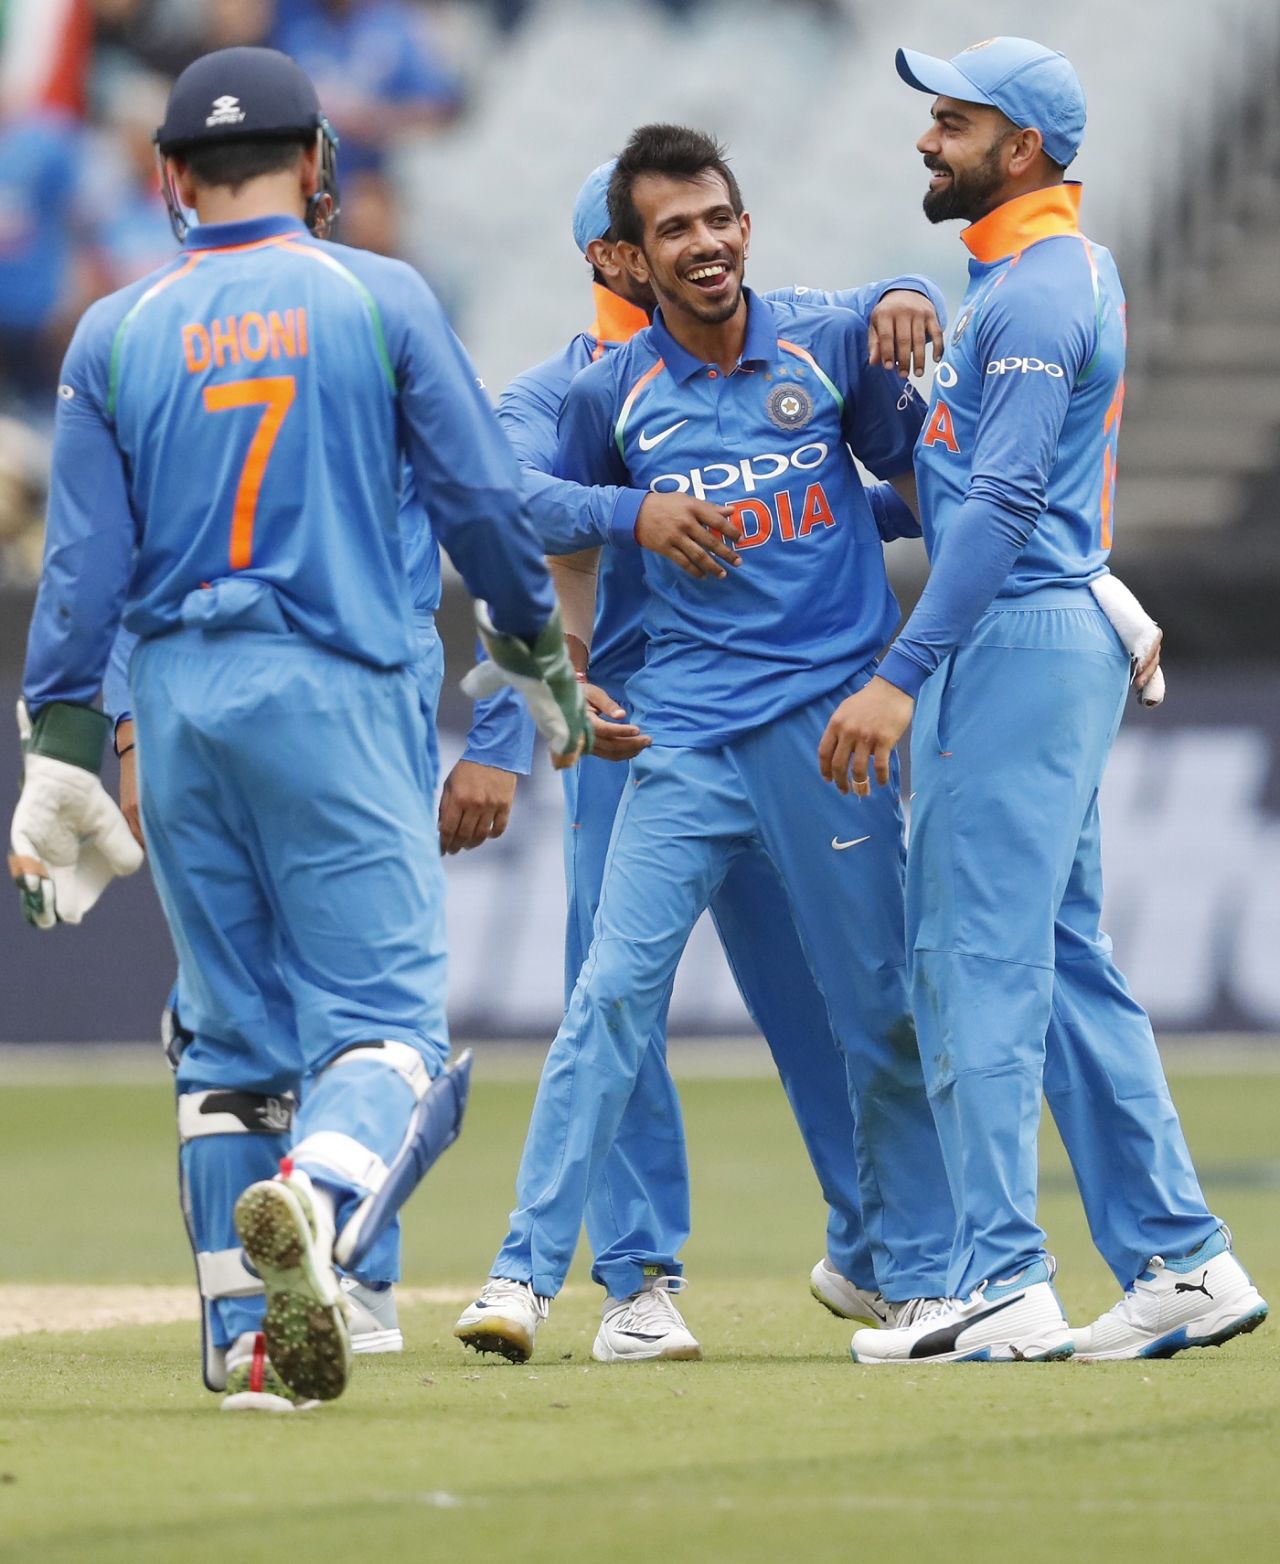 Yuzvendra Chahal wrecked Australia's middle order with three quick wickets, Australia v India, 3rd ODI, Melbourne, January 18, 2019